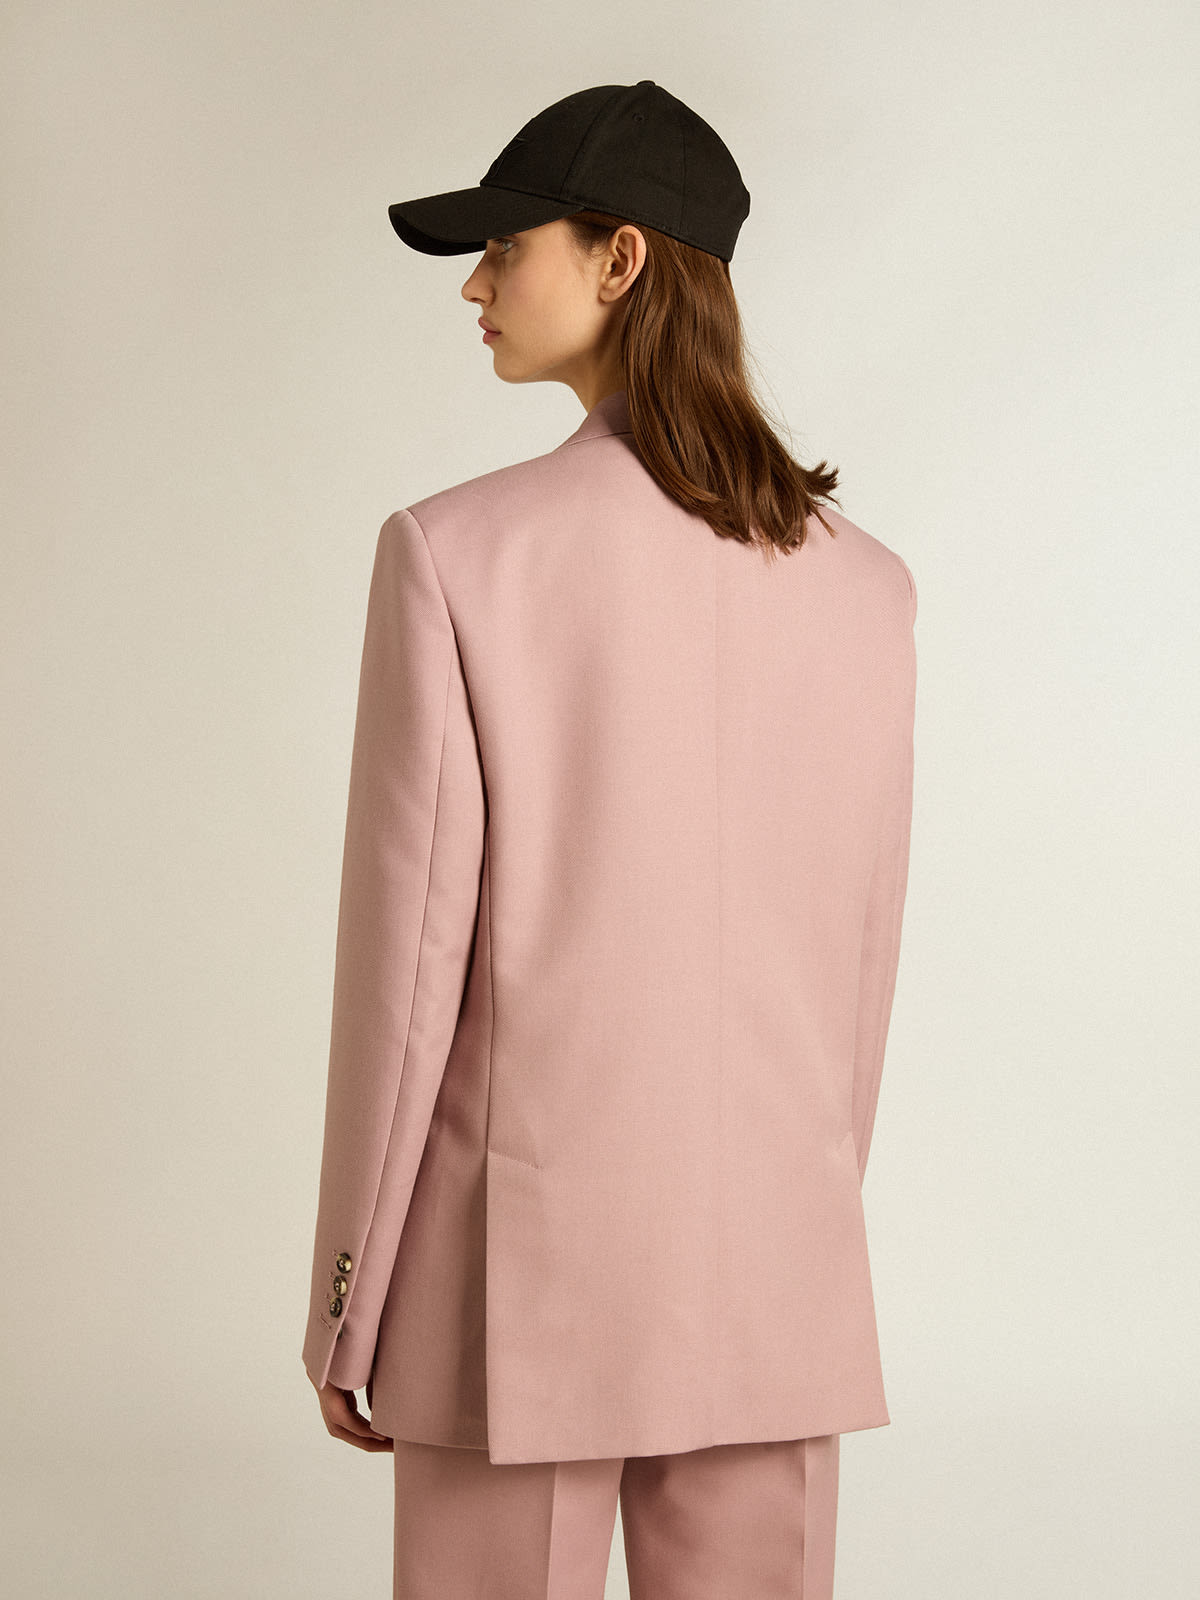 Golden Goose - Double-breasted blazer in pink tailoring fabric in 